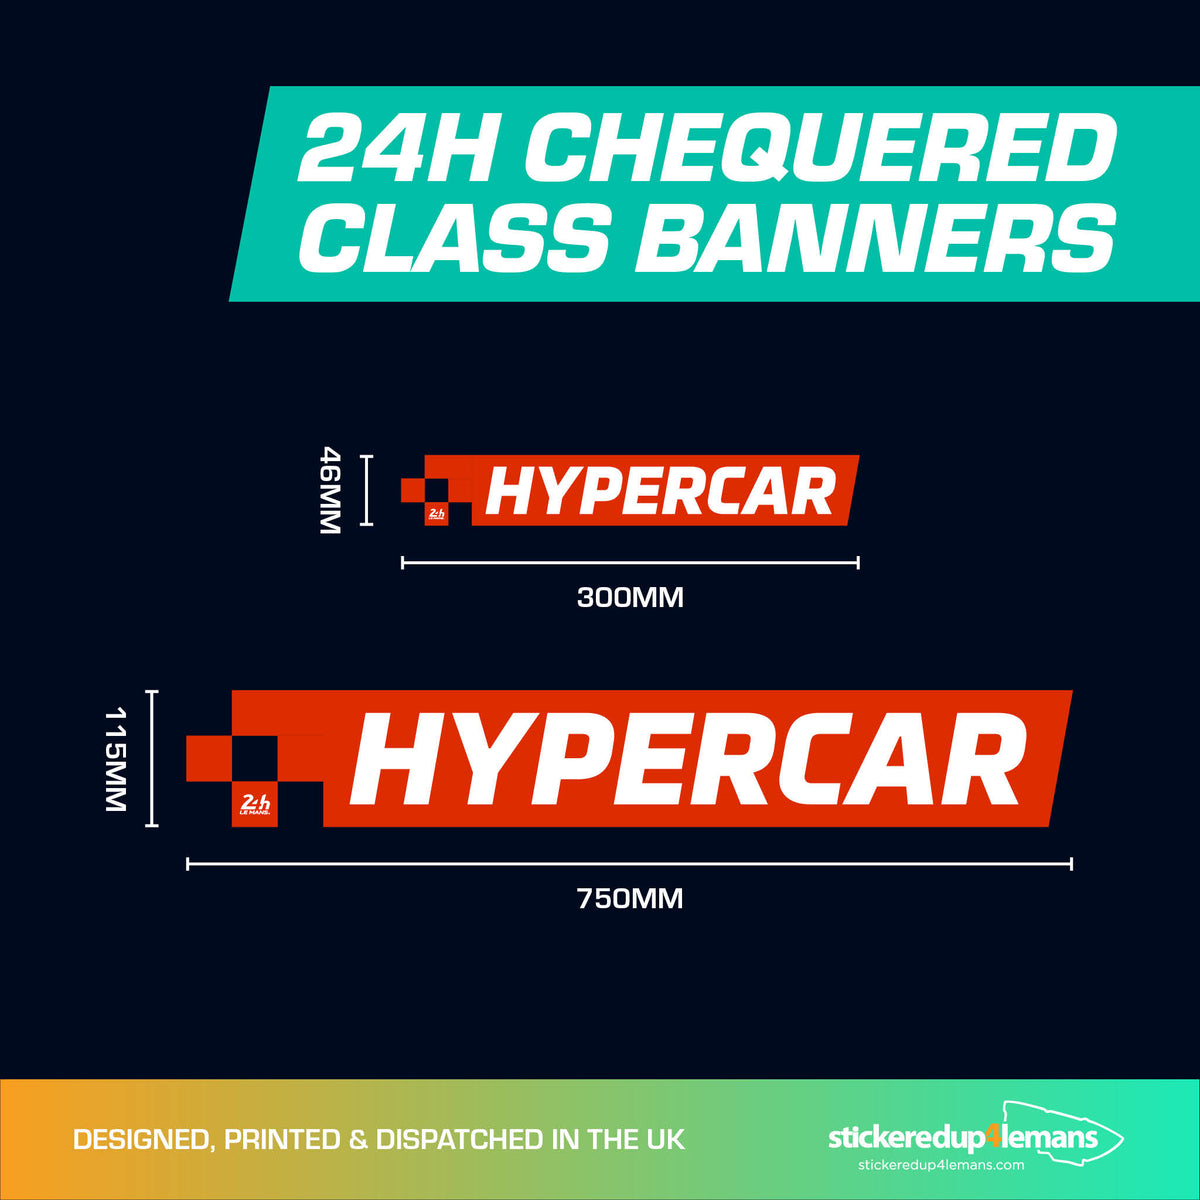 Official Le Mans 24h Chequered Class Banners Sticker